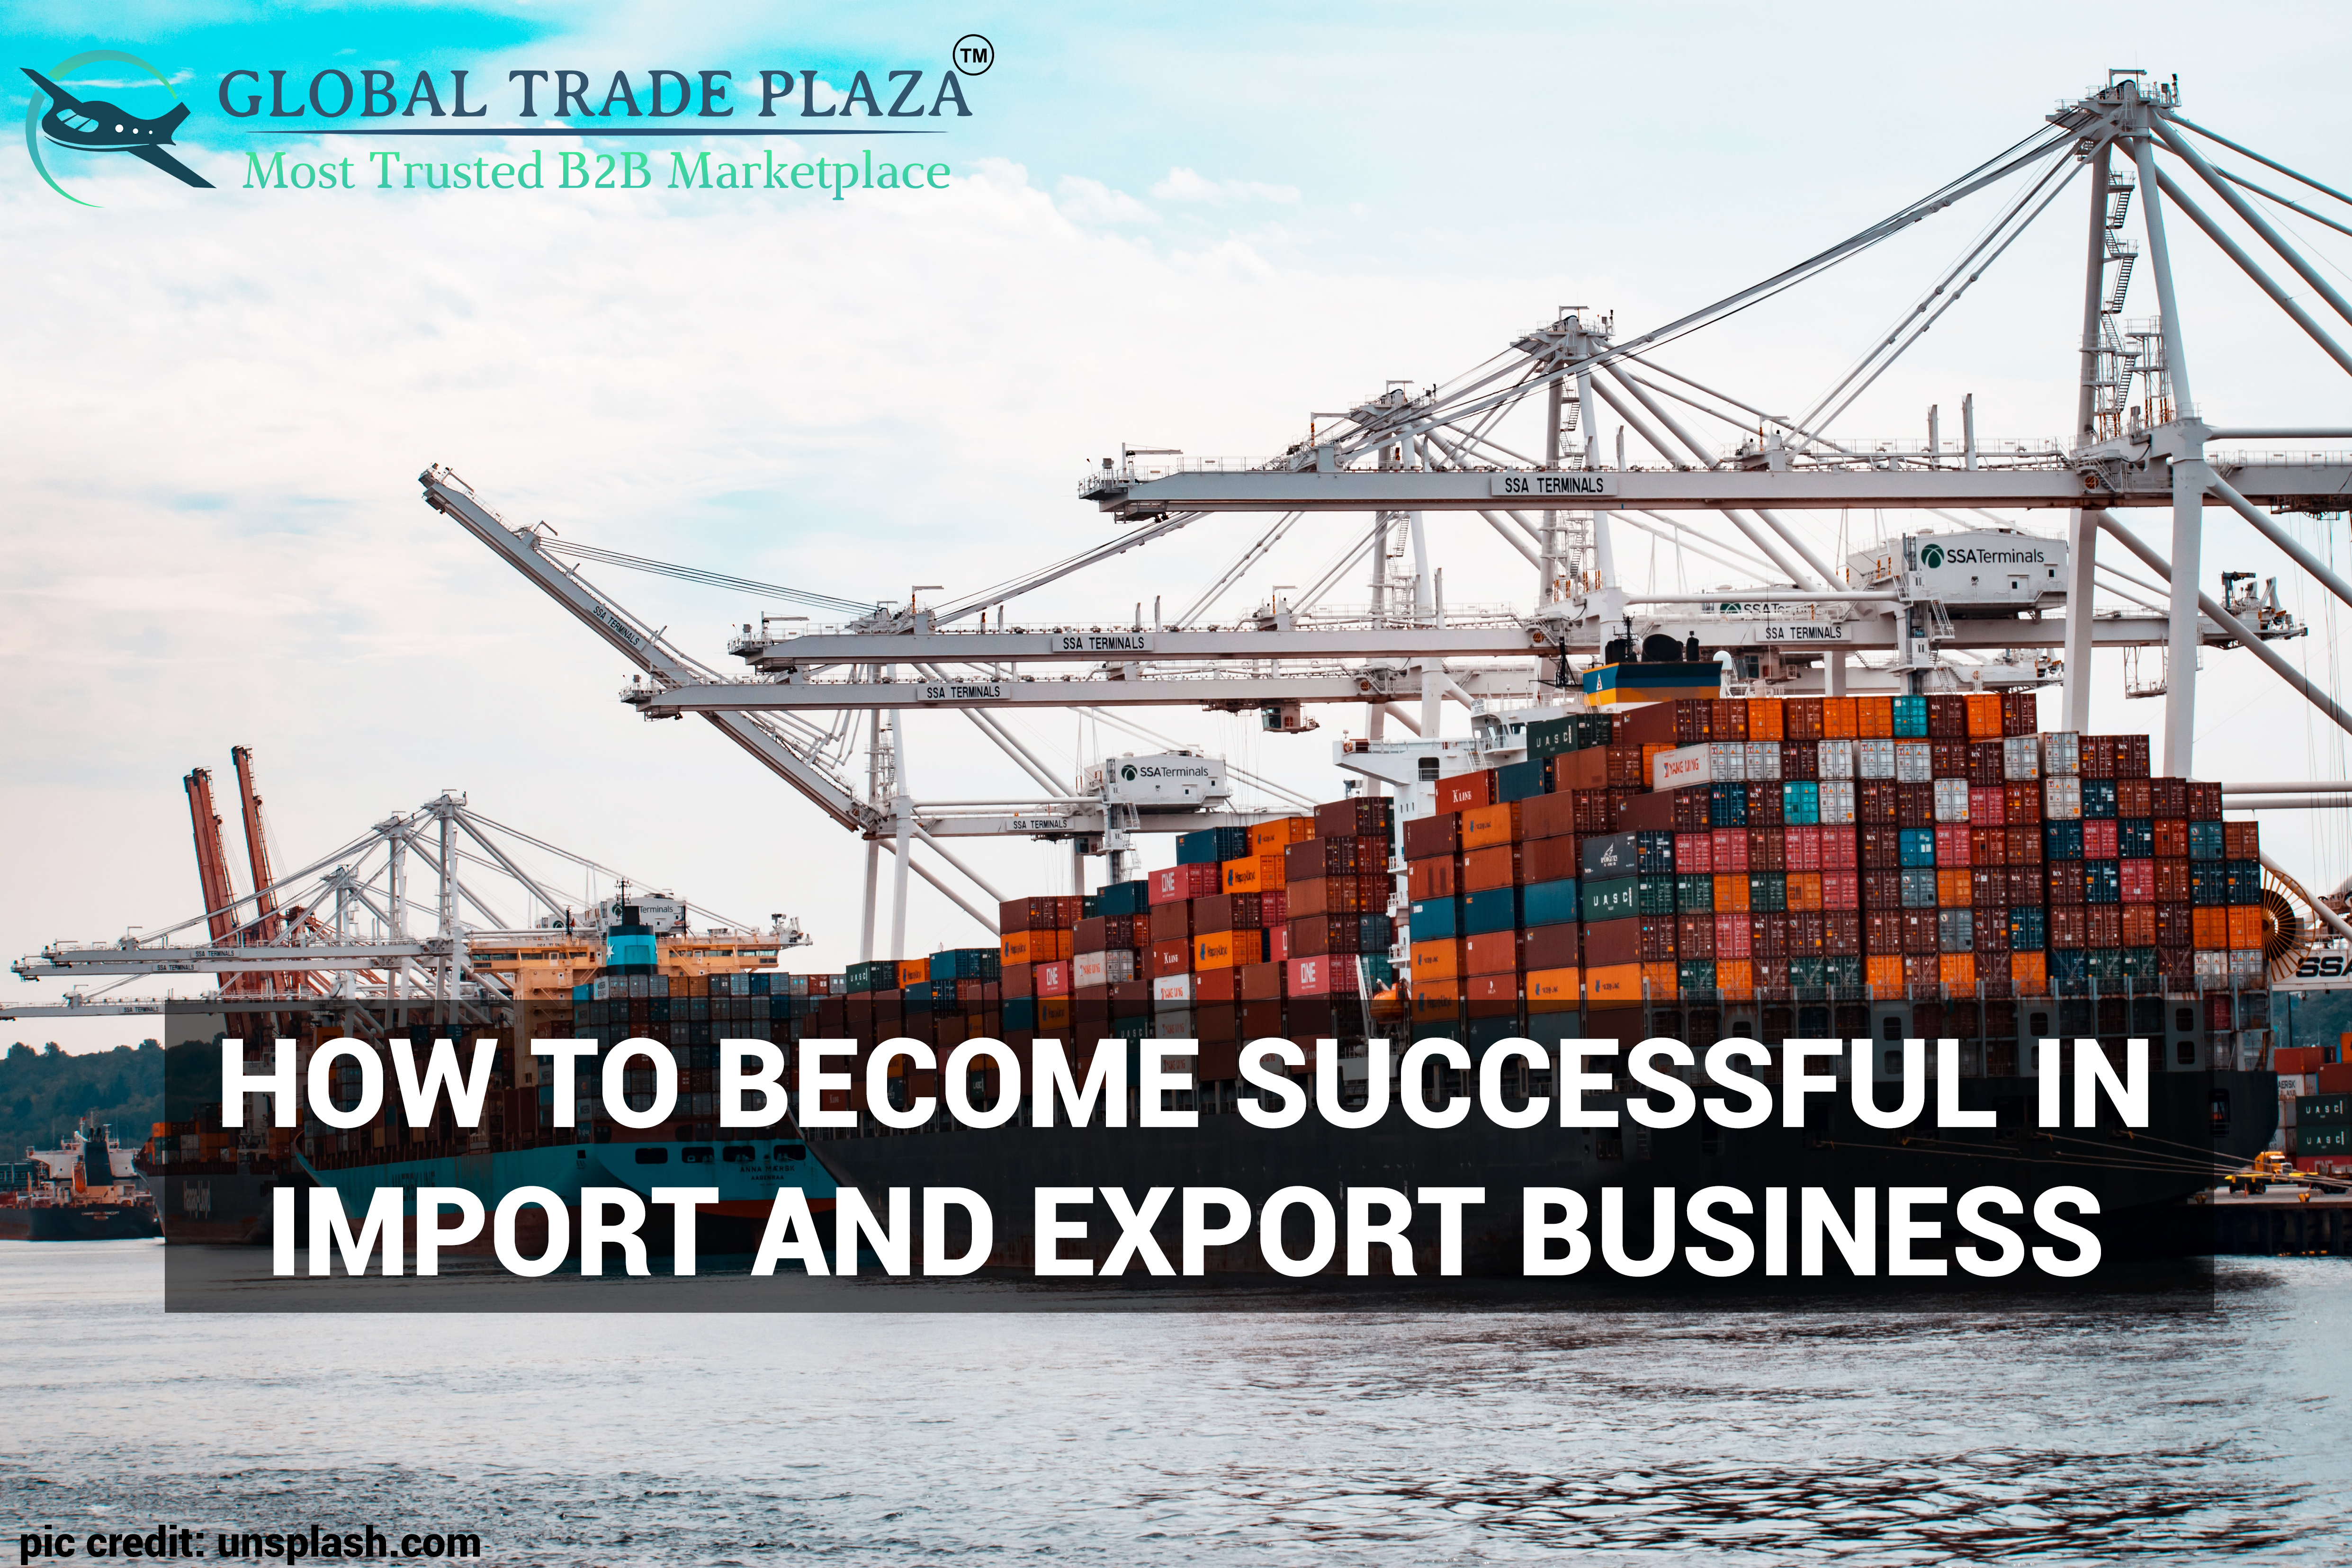 How To Become Successful in Import and Export Business